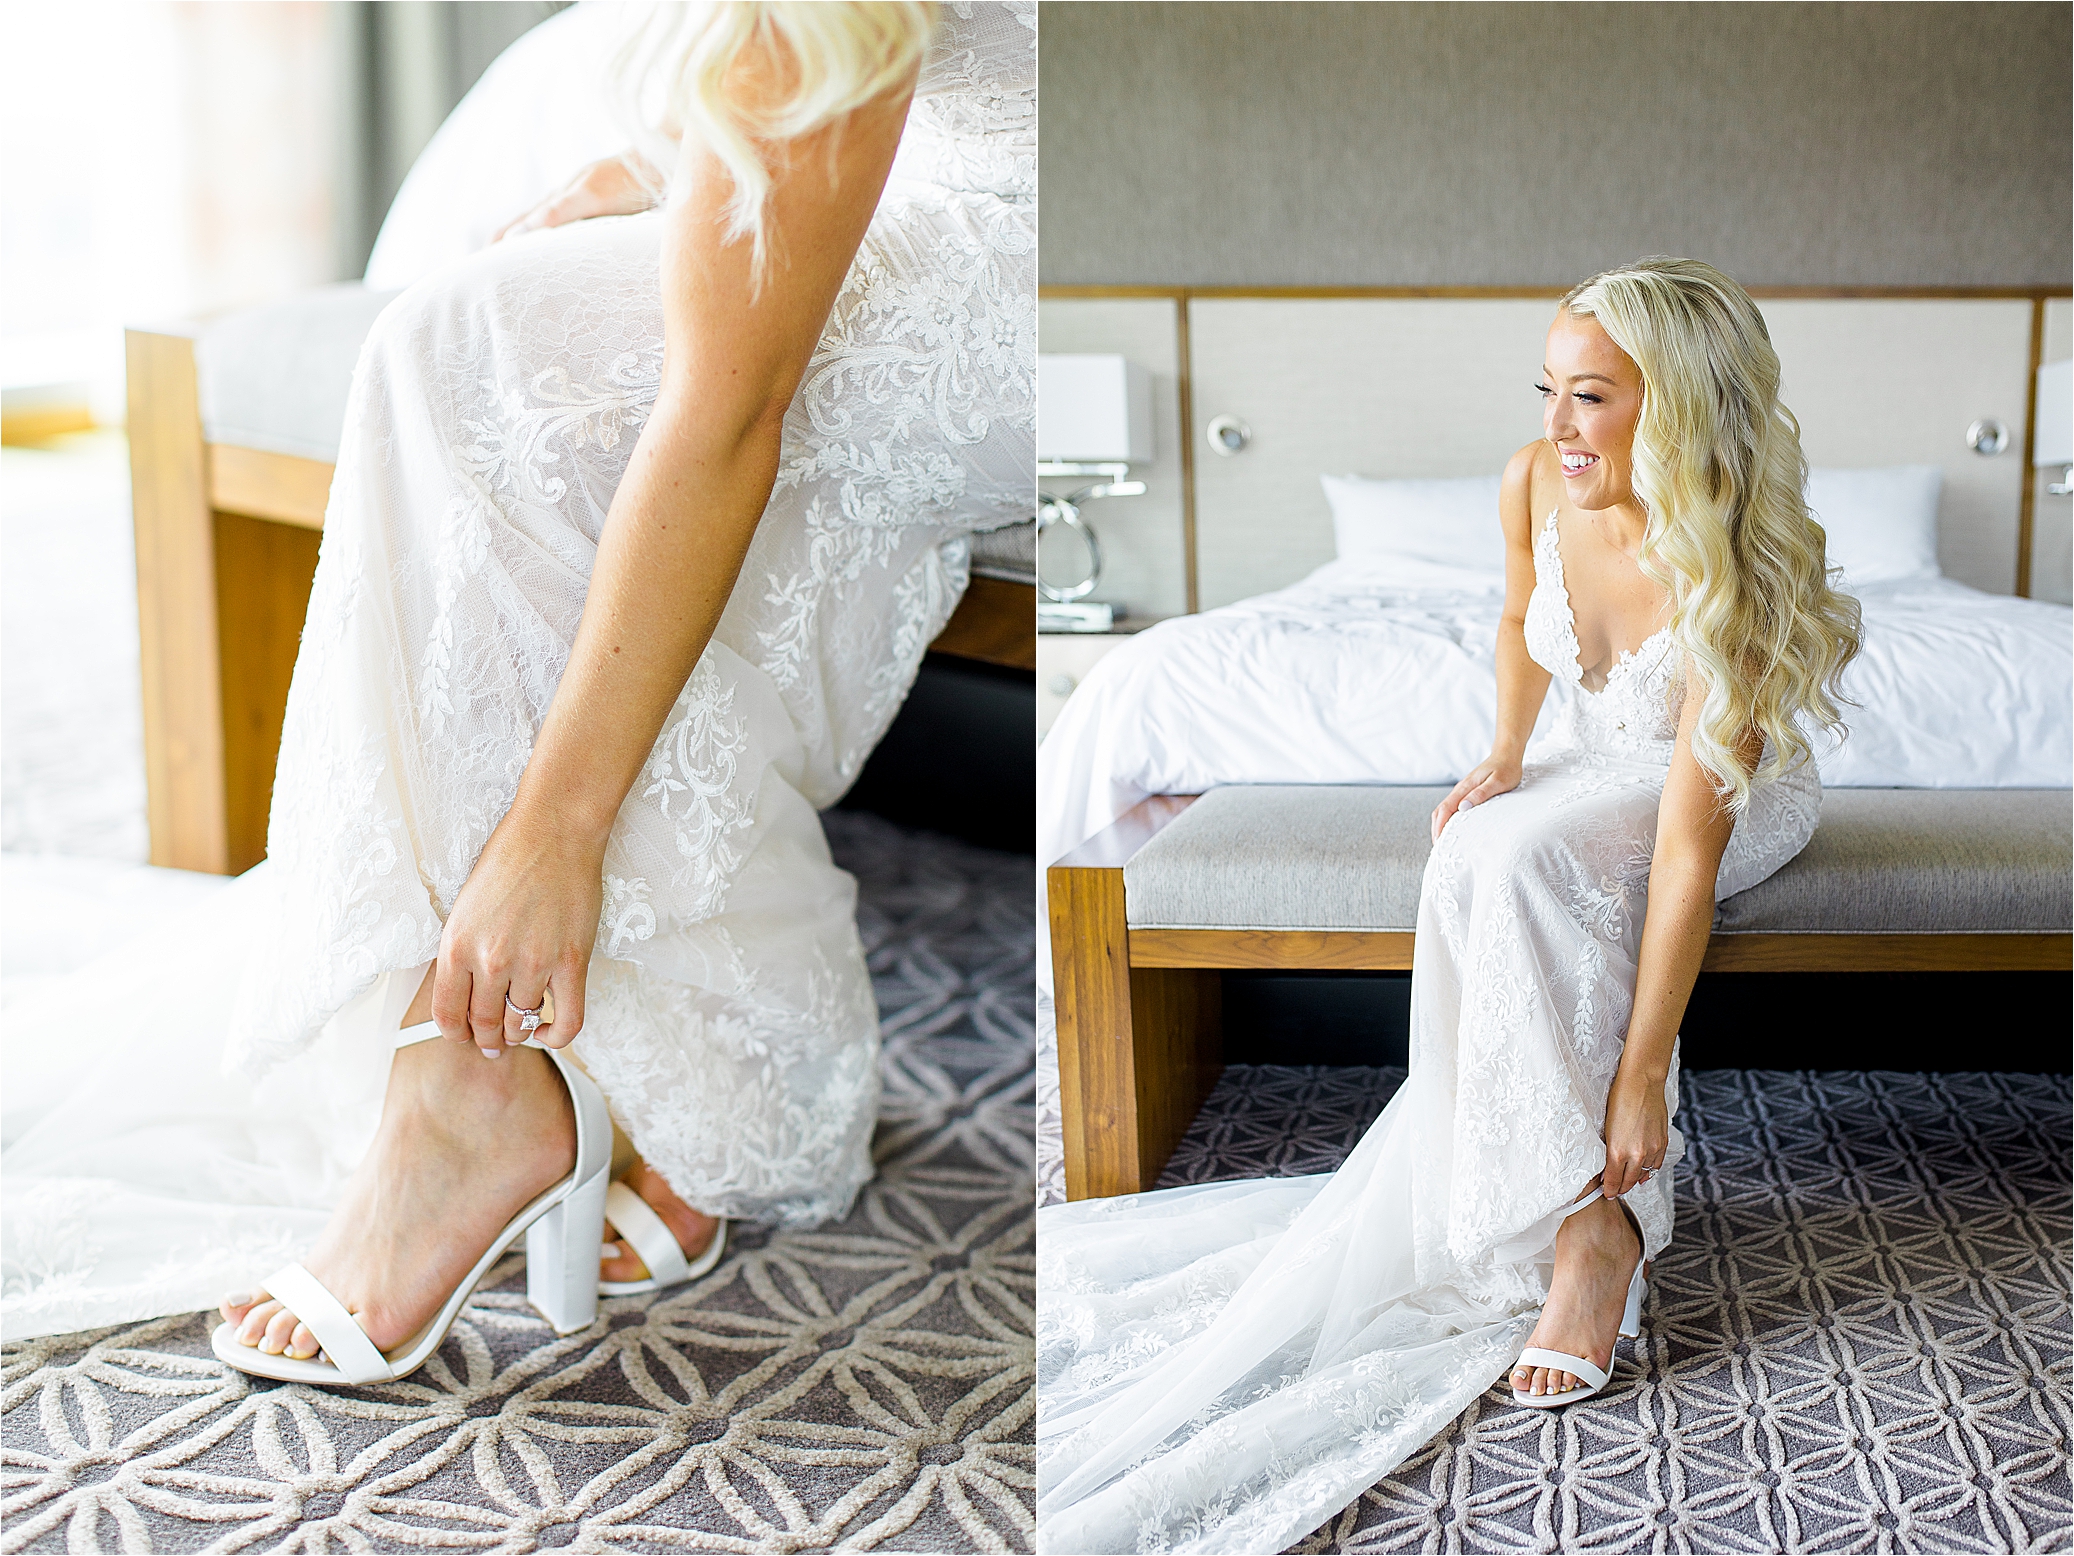 A bride in her lace wedding dress leans over and adjusts her shoes with a big smile on her face as she gets ready for her wedding day in hotel room at JW Marriott in Austin, Texas